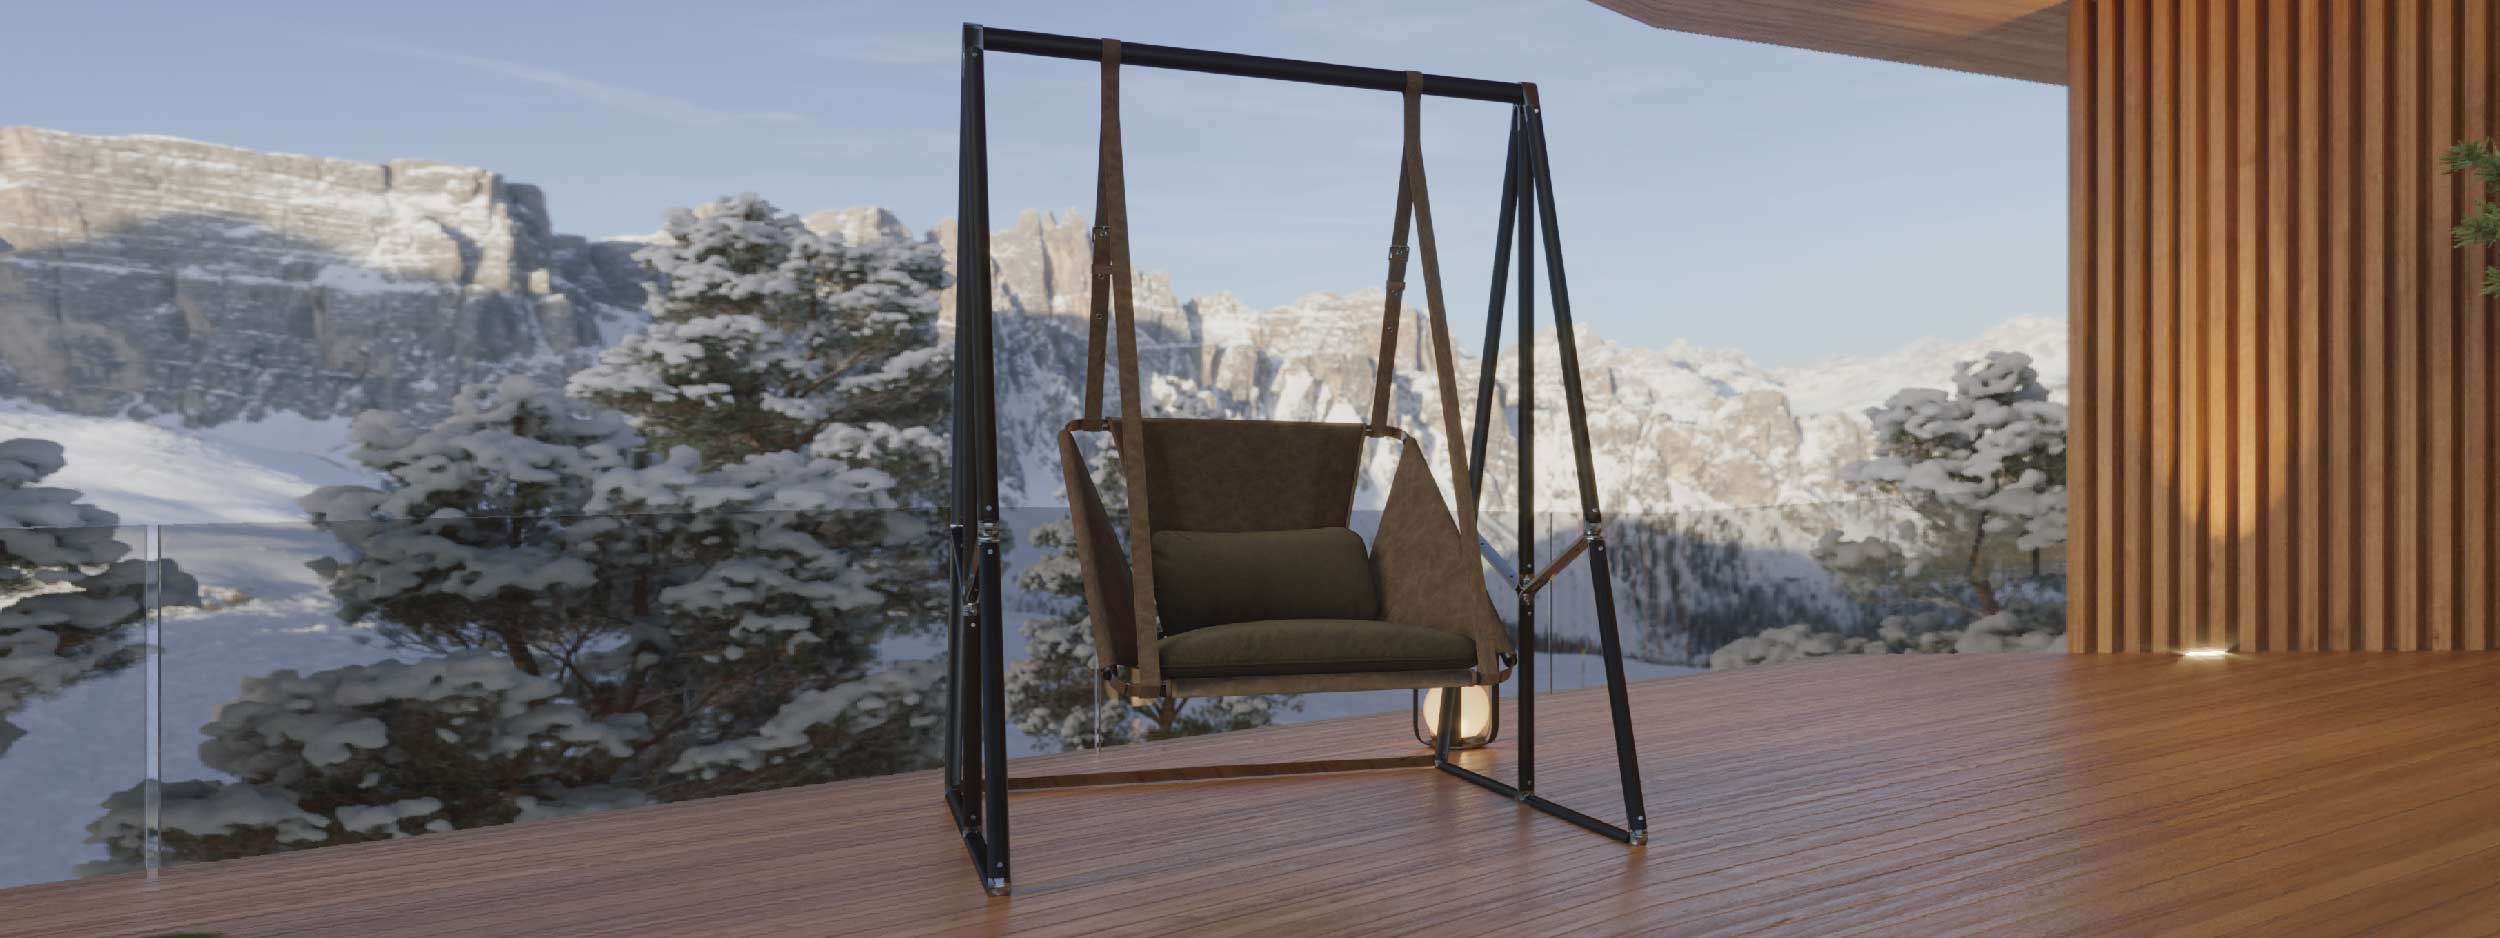 Image of Fable luxury swing chair and stand on decked terrace with snow and snow-covered trees in the background